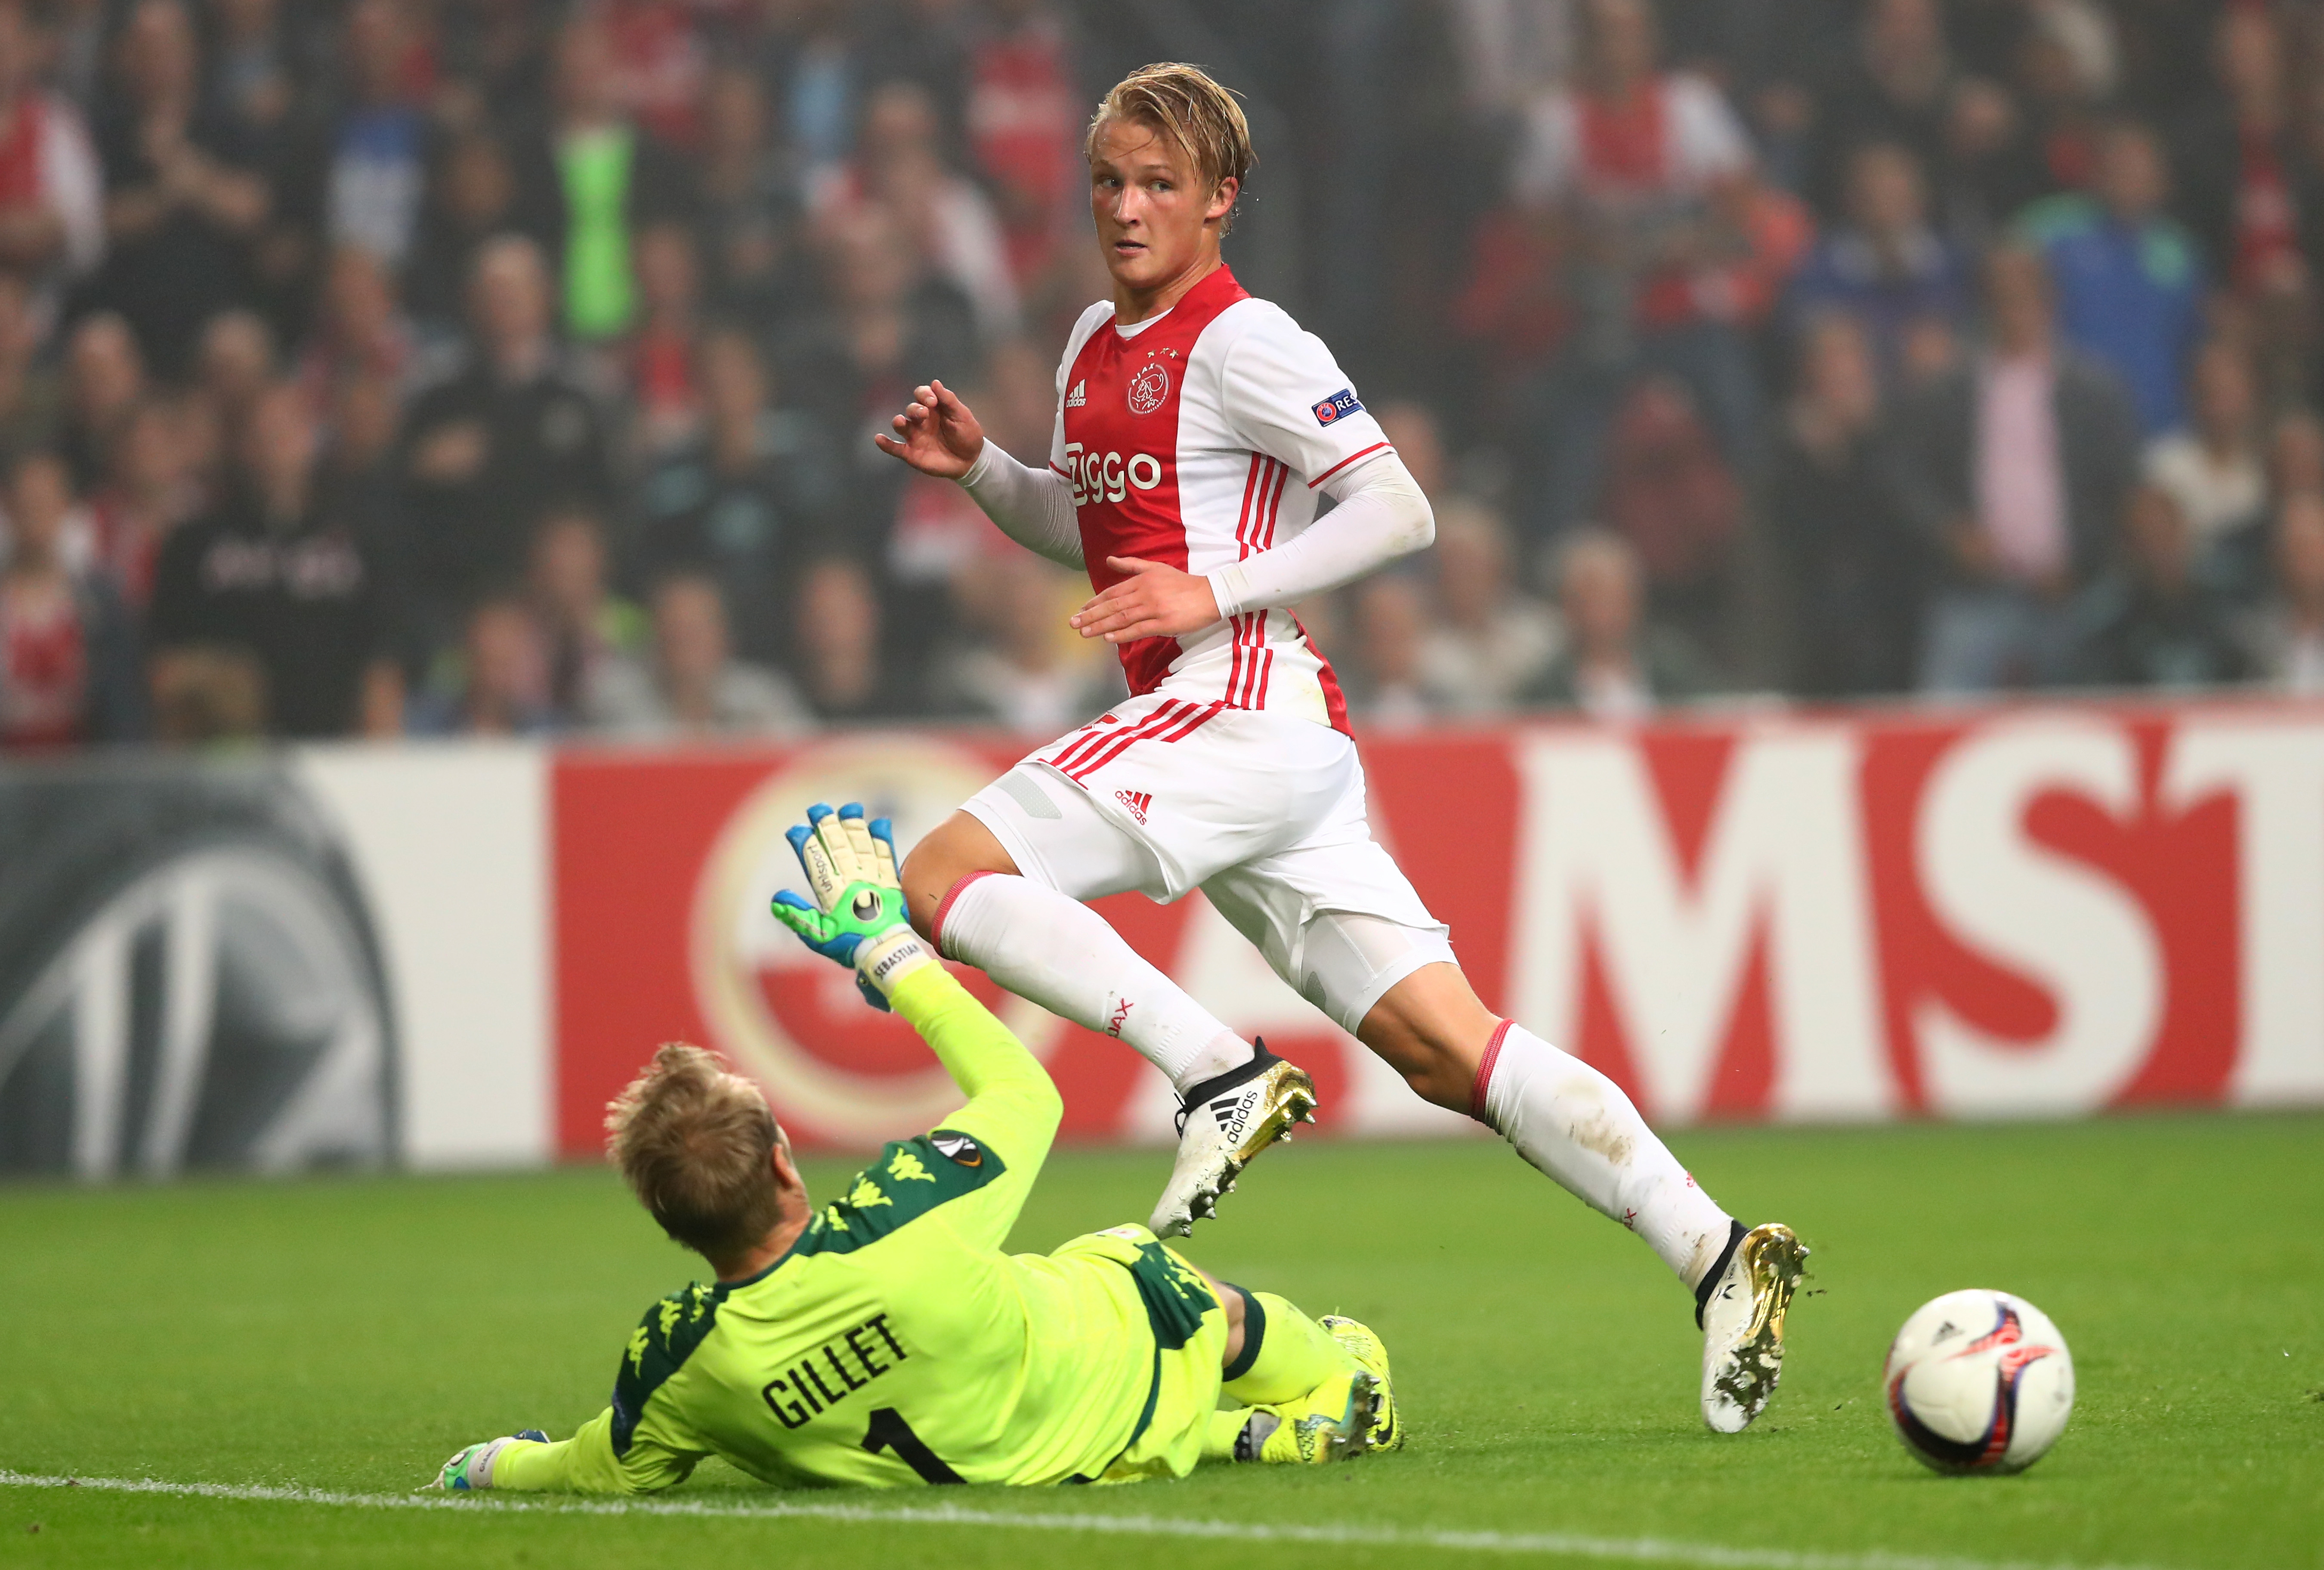 AMSTERDAM, NETHERLANDS - SEPTEMBER 29:  Kasper Dolberg of Ajax is tackled by goalkeeper Jean-François Gillet of Standard Liege during the UEFA Europa League group A match between Manchester United FC and FC Zorya Luhansk at Old Trafford on September 29, 2016 in Manchester, England.  (Photo by Dean Mouhtaropoulos/Getty Images)